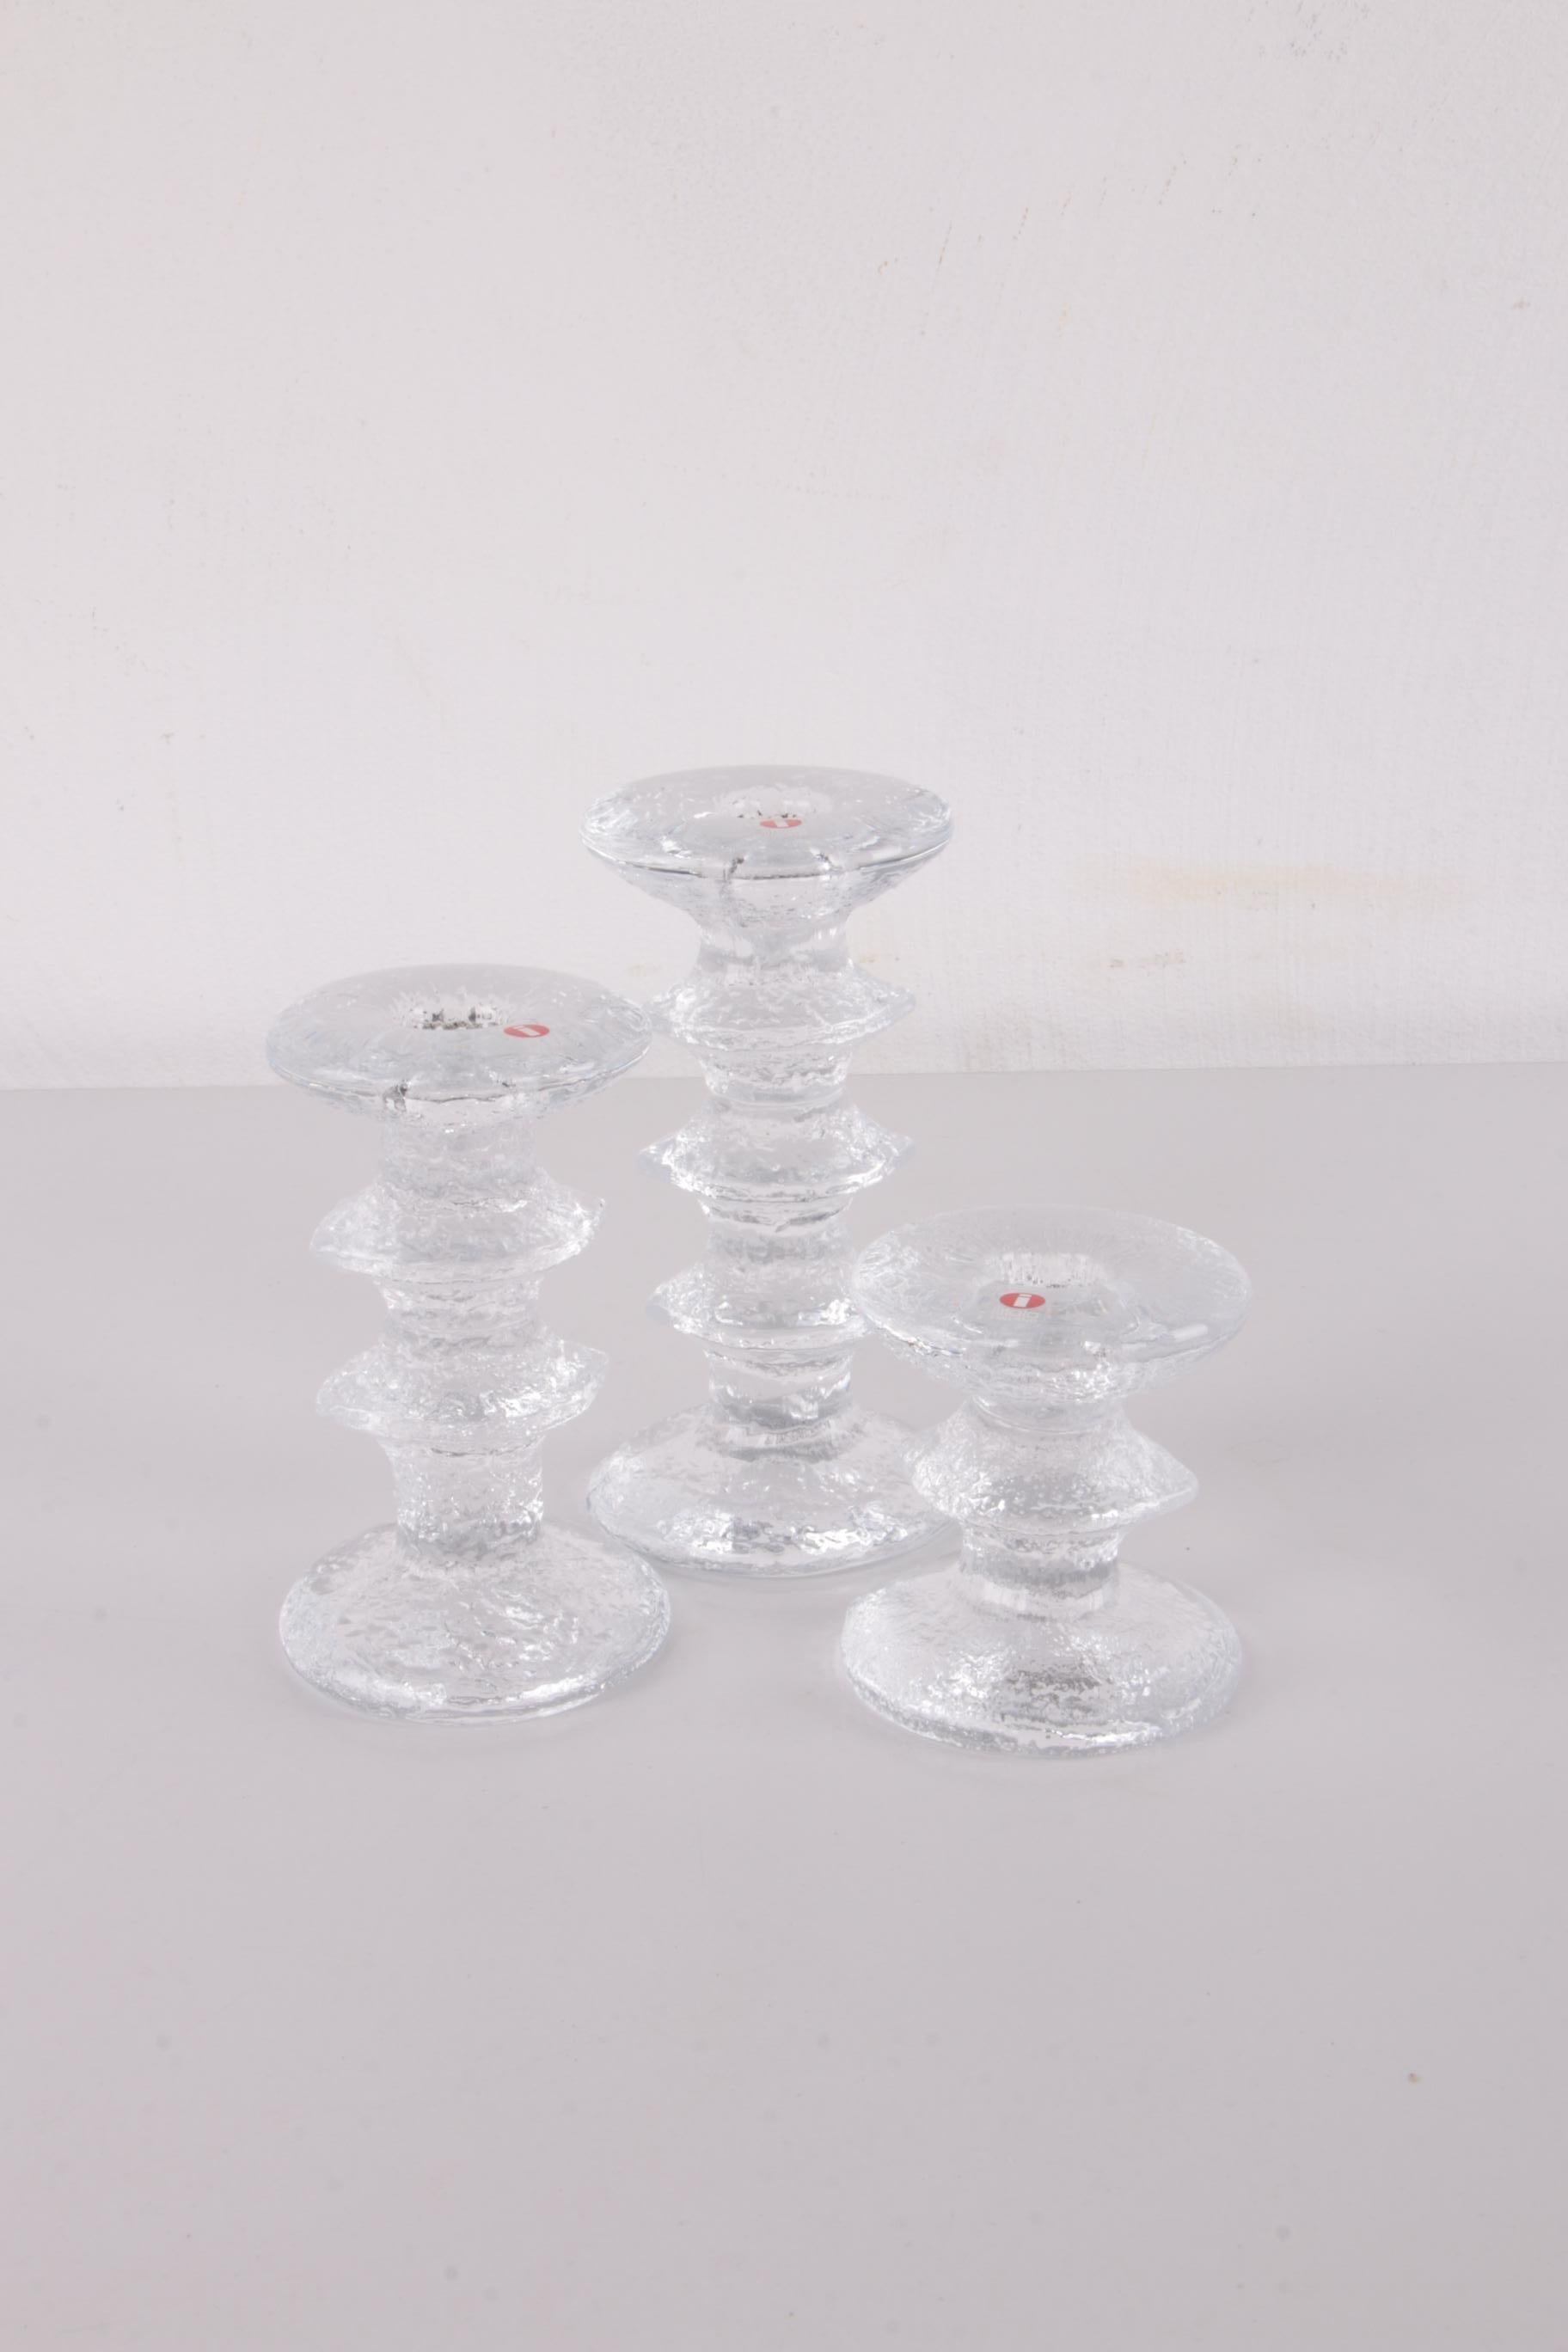 Vintage Set of 3 iittala glass candlesticks Design by Timo Sarpaneva 1960s


A beautiful set of 3 glass candlesticks from Scandinavia: signed Iittala festivo candlestick/candle holder with multiple rings design by Timo Sarpaneva from